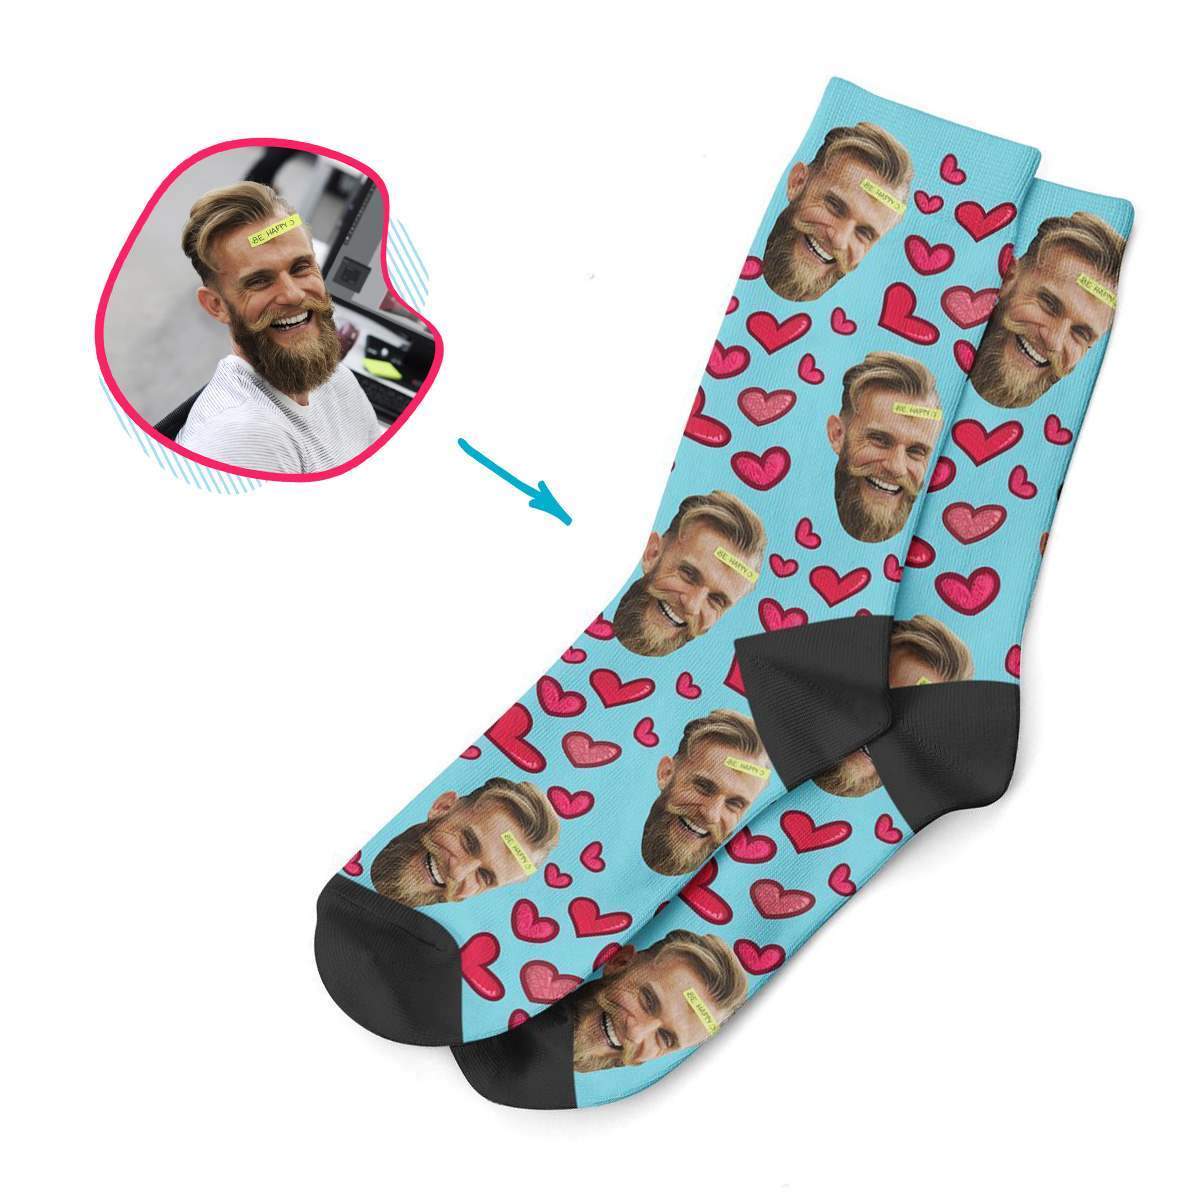 blue Heart socks personalized with photo of face printed on them